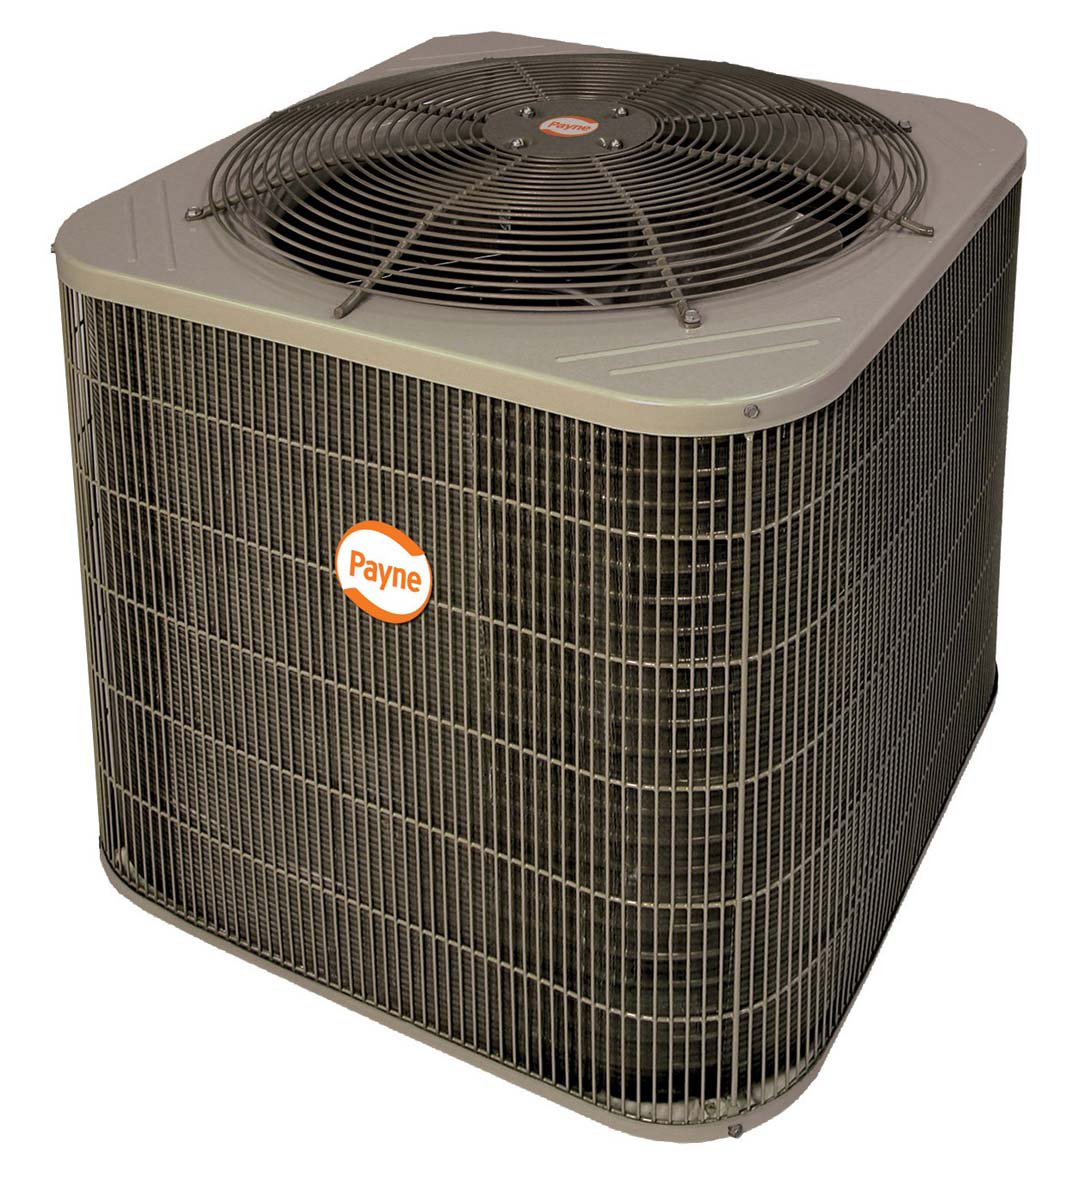 payne air conditioners model numbers